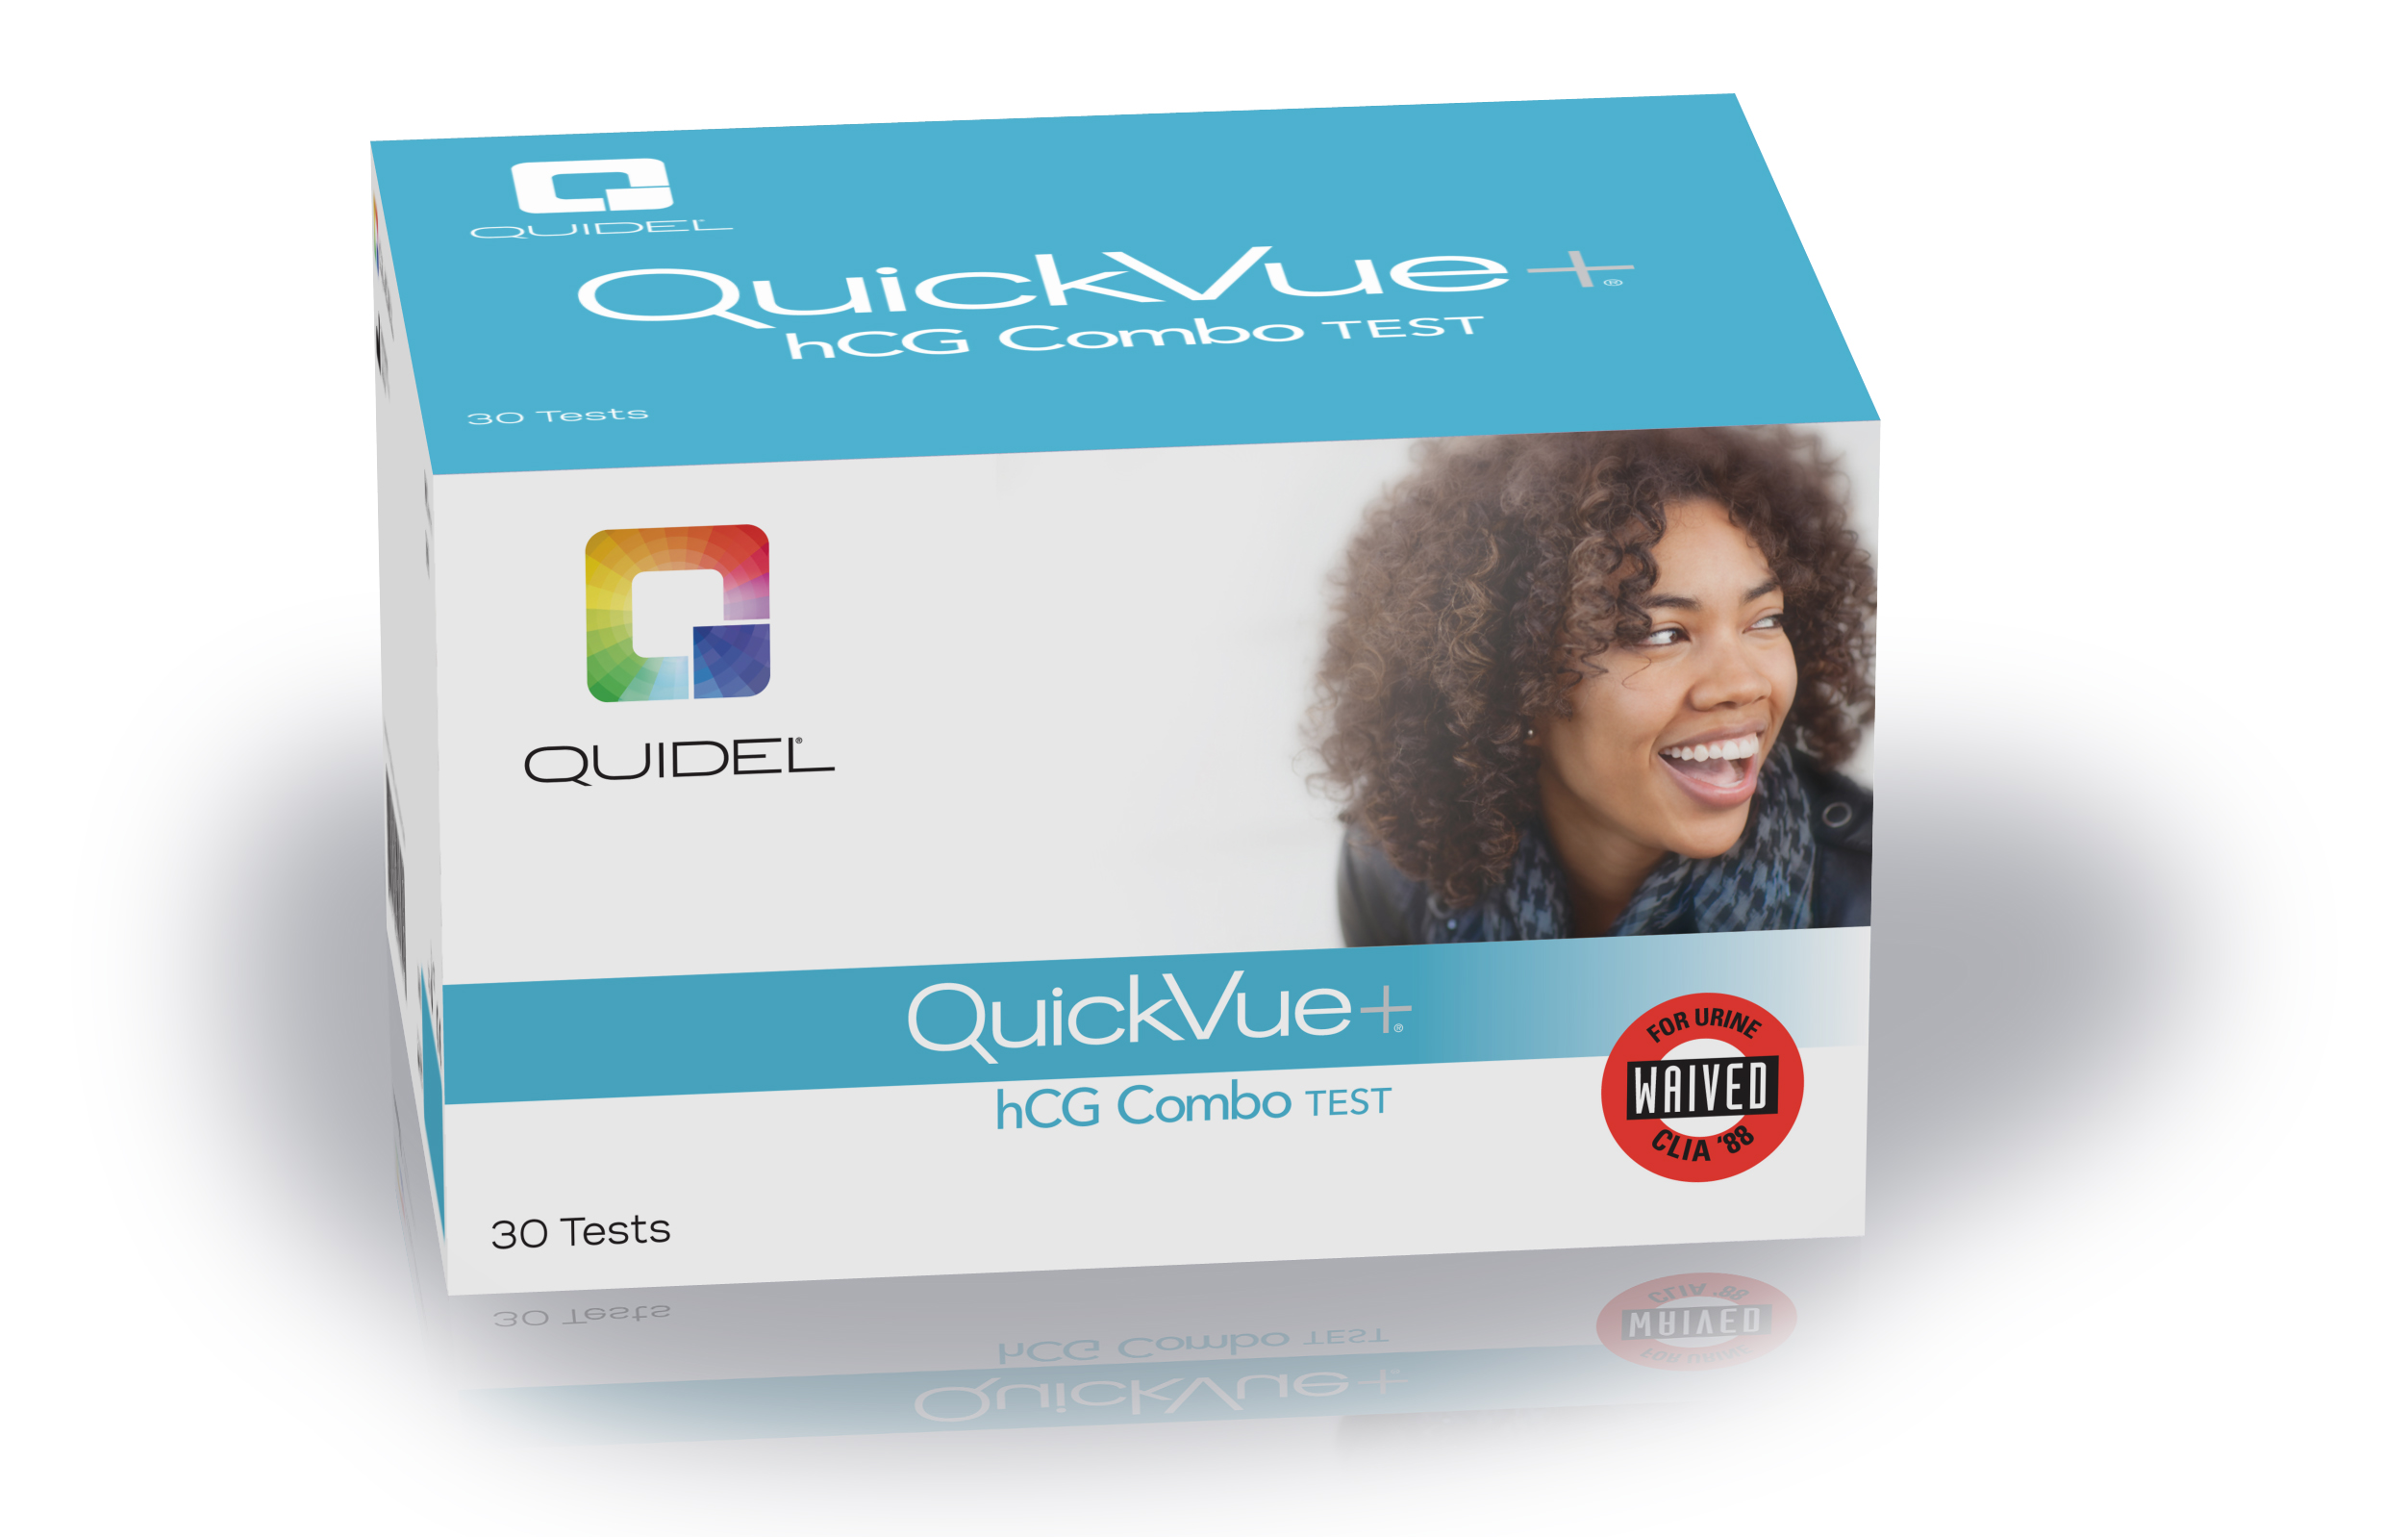 QuickVue+ One-Step hCG Combo Test